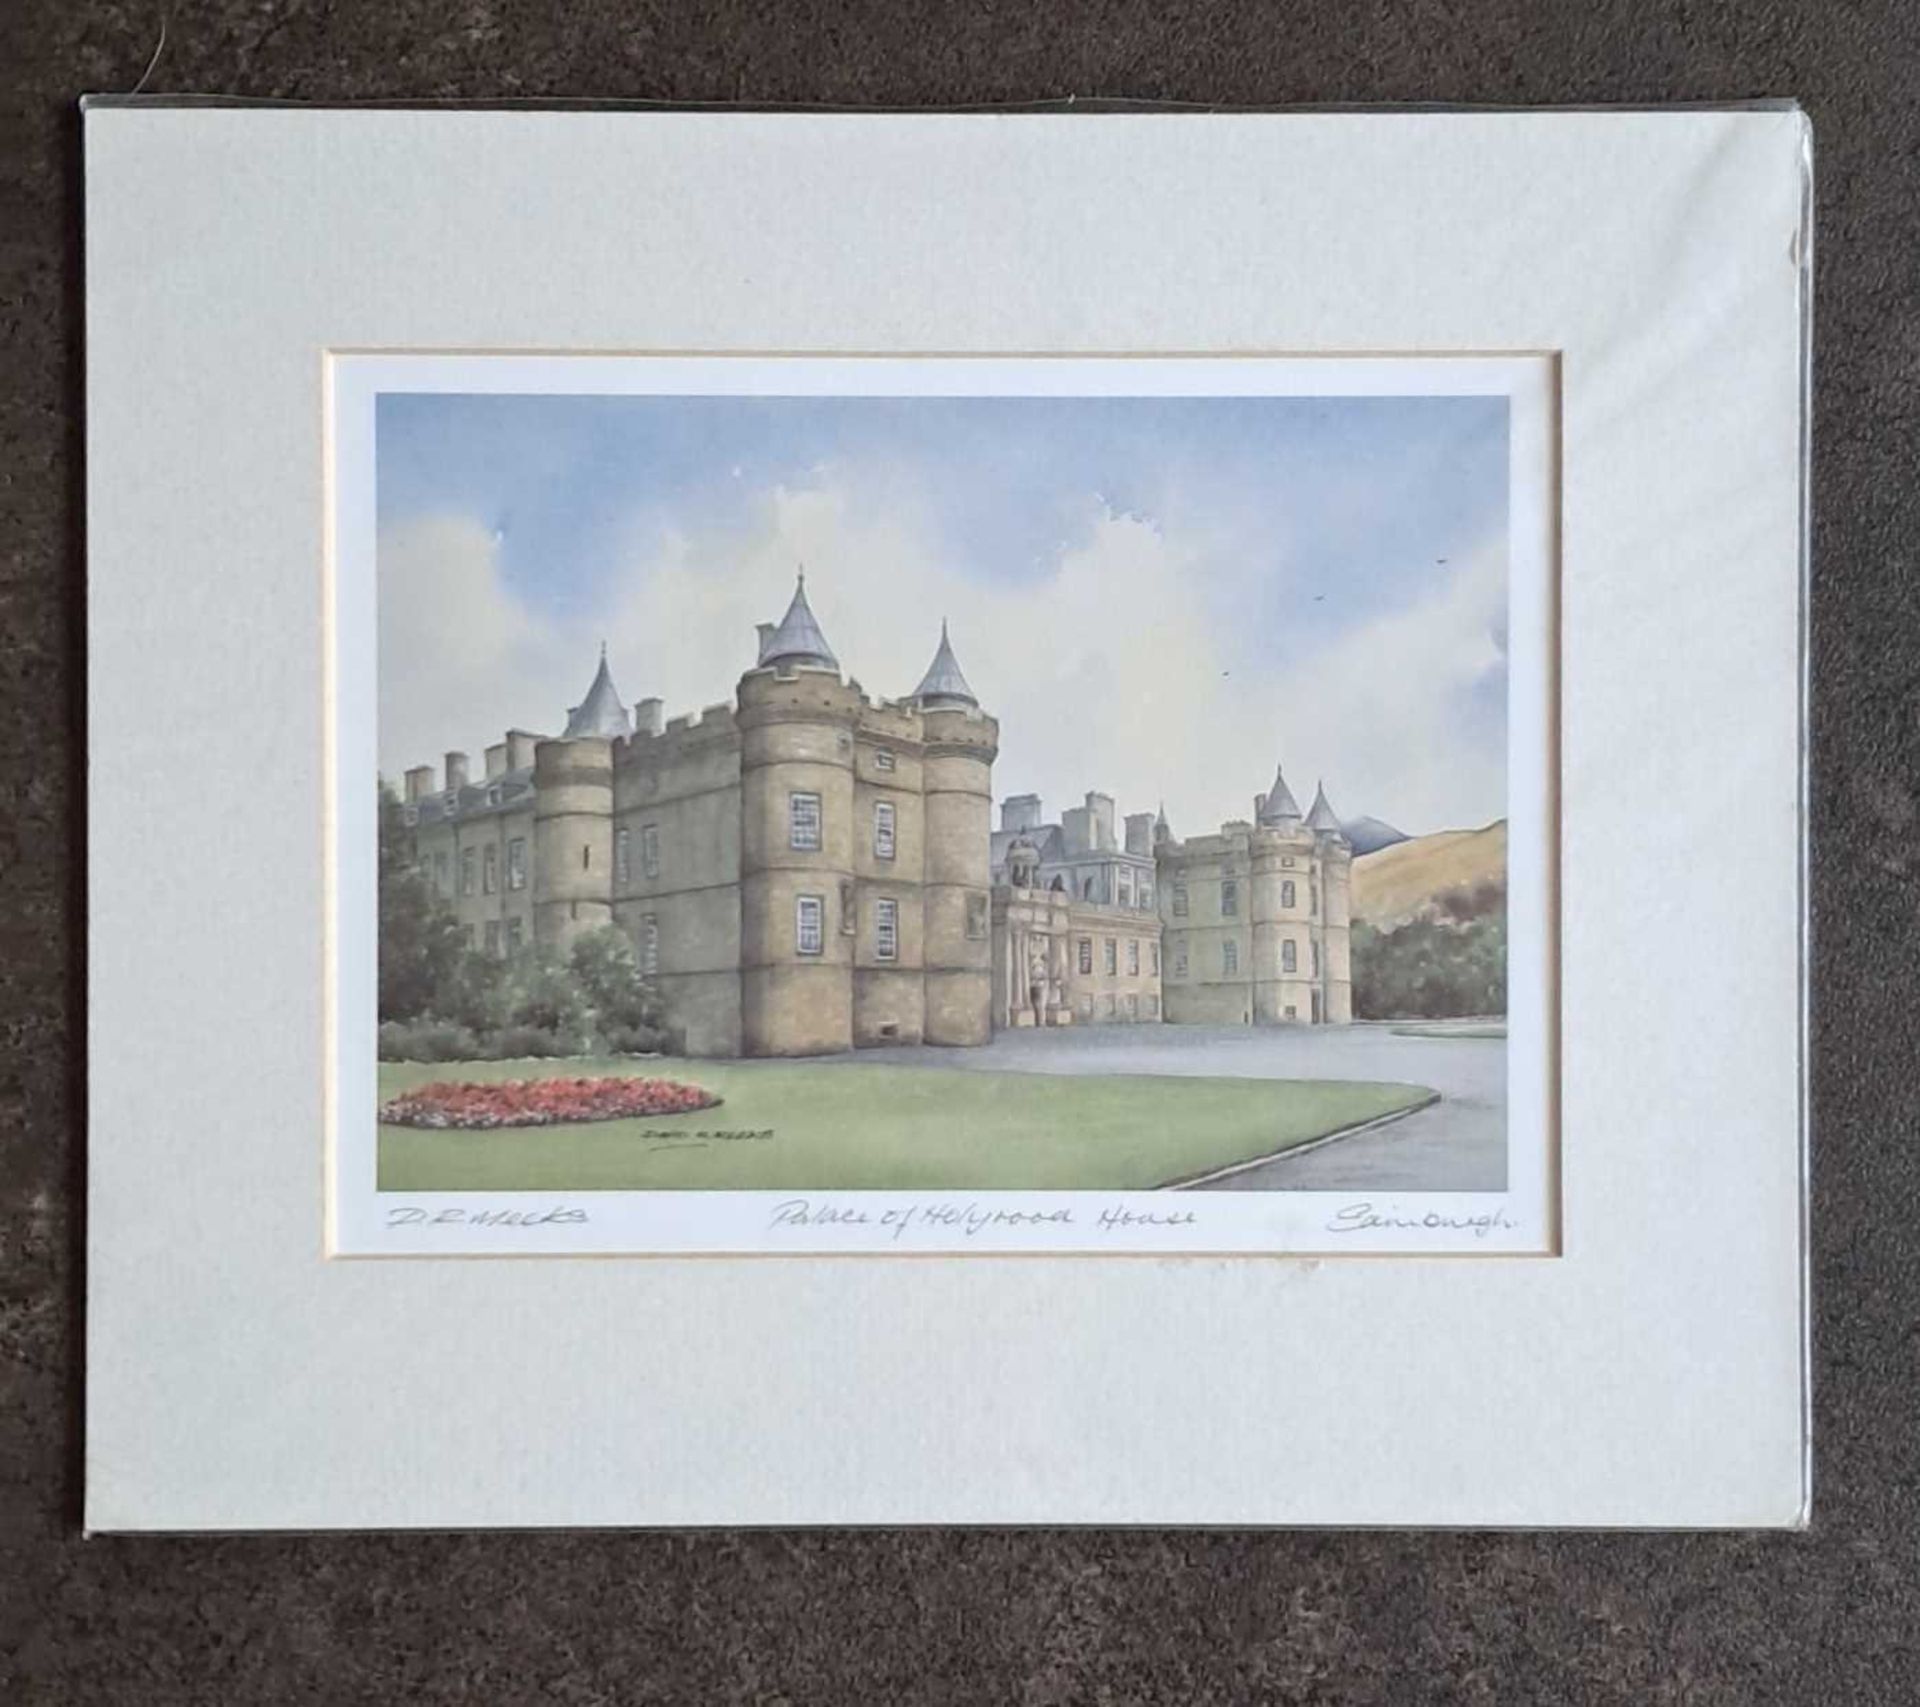 DAVID R MEEKS - PALACE OF HOLYROOD HOUSE LIMITED EDITION, 260 x 315 mm.